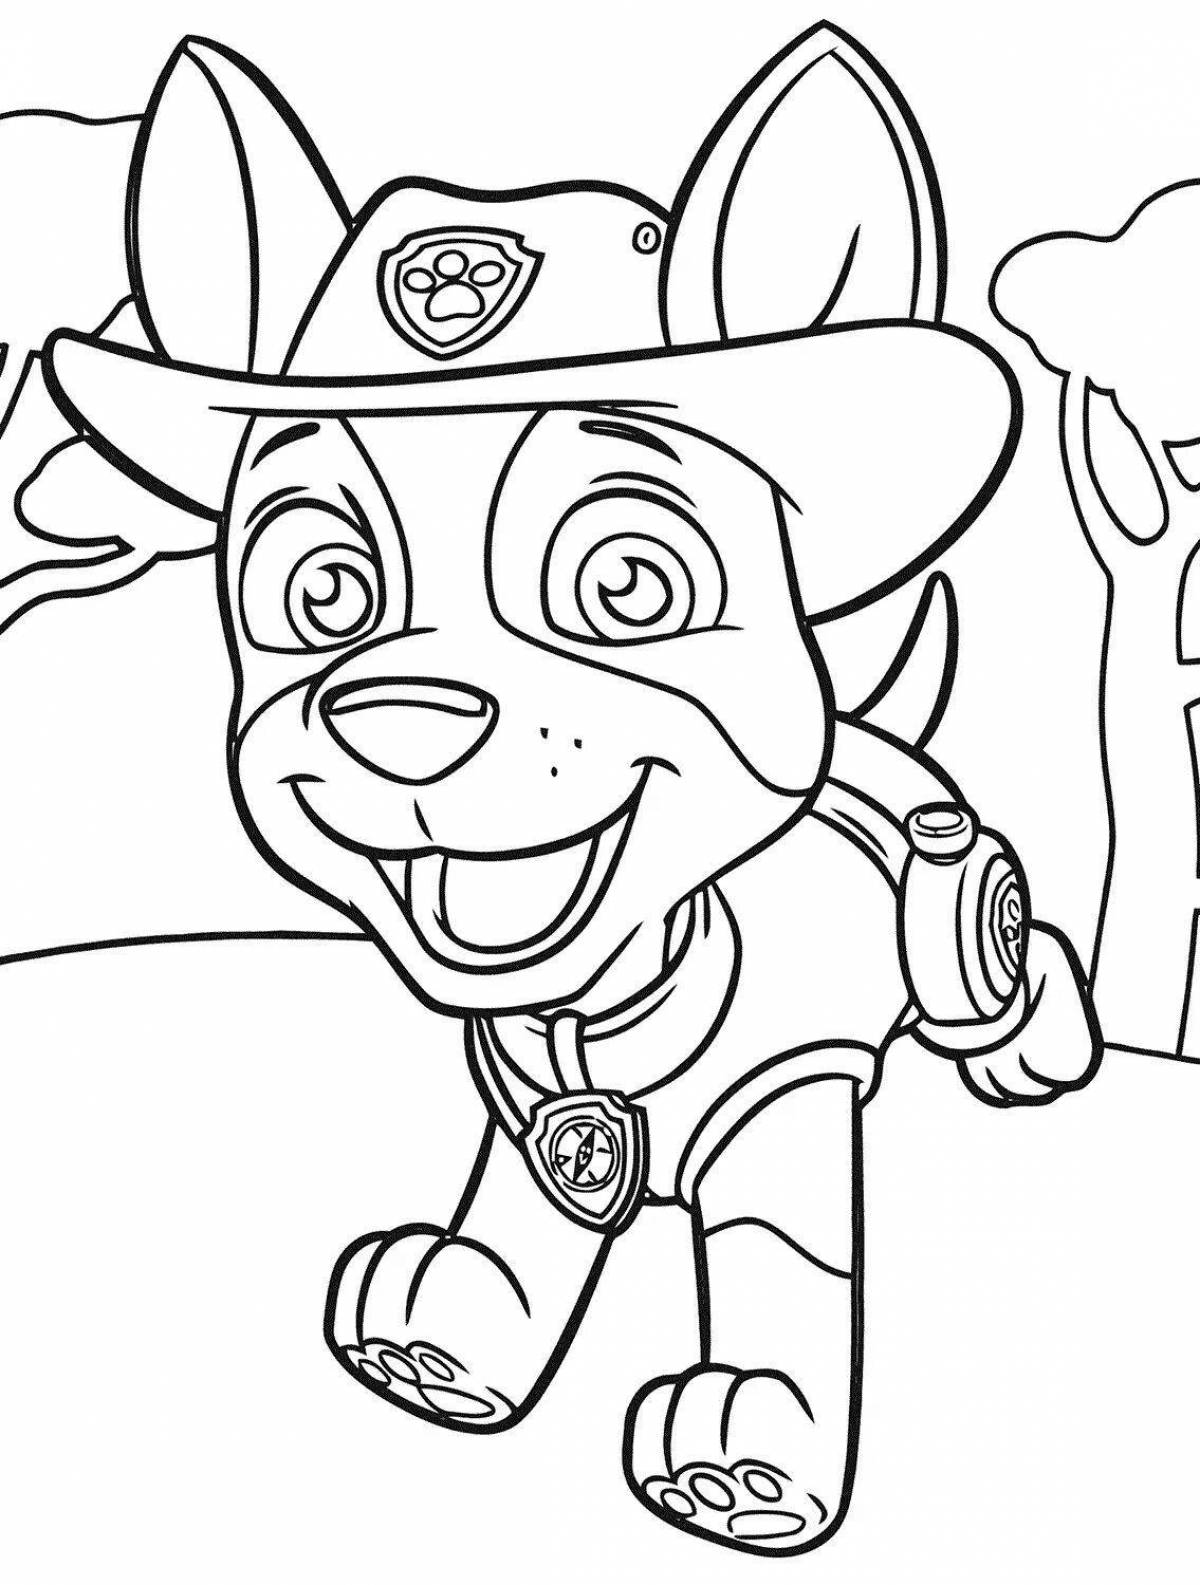 Coloring page paw patrol tracker